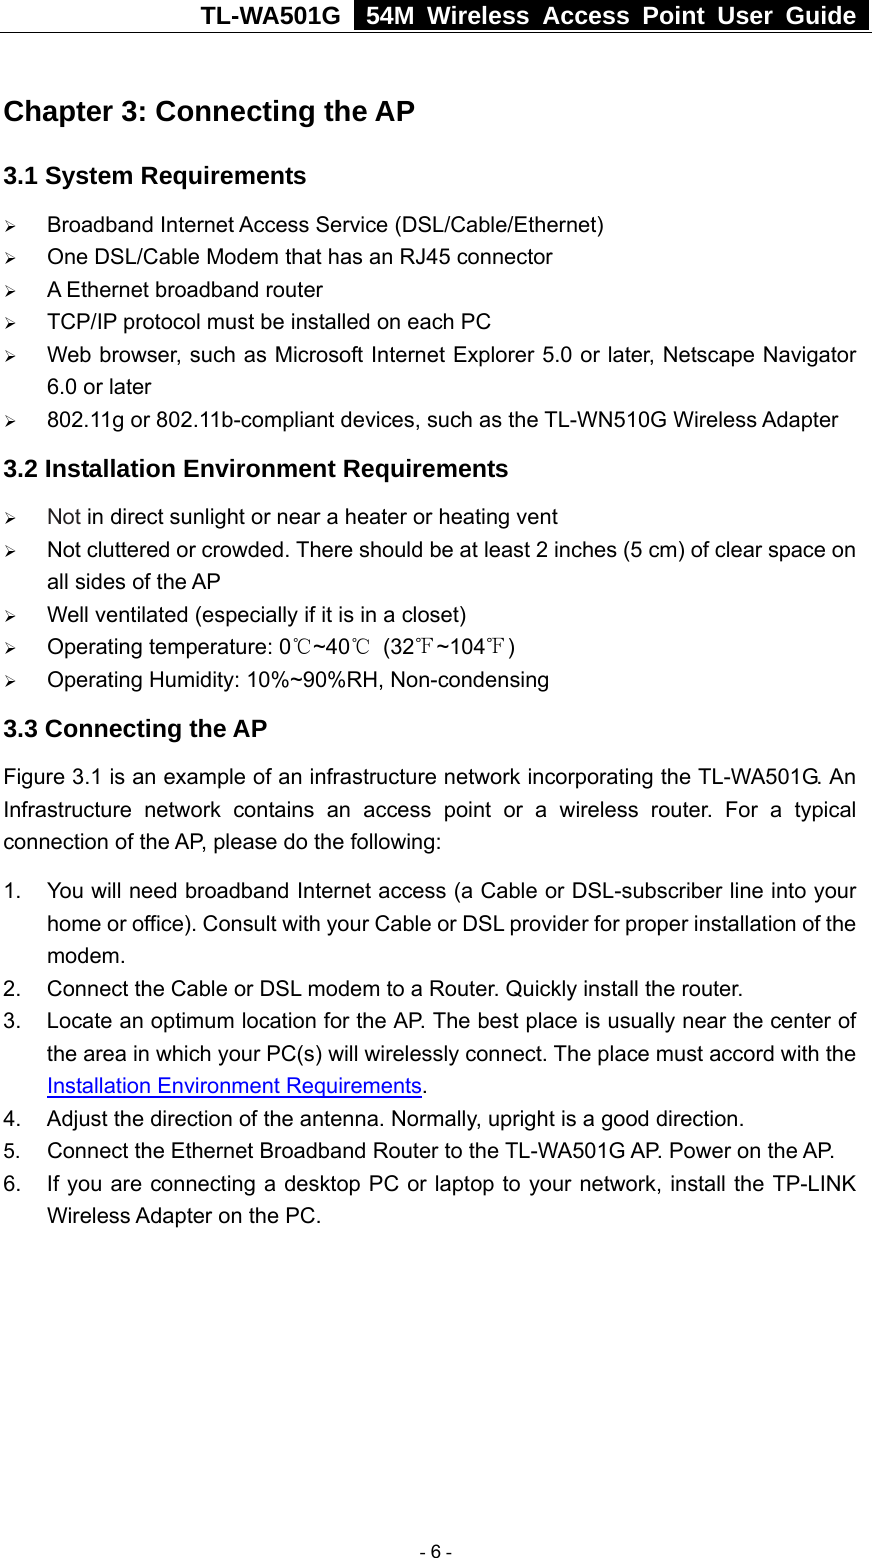 TL-WA501G   54M Wireless Access Point User Guide  Chapter 3: Connecting the AP 3.1 System Requirements ¾ Broadband Internet Access Service (DSL/Cable/Ethernet) ¾ One DSL/Cable Modem that has an RJ45 connector ¾ A Ethernet broadband router ¾ TCP/IP protocol must be installed on each PC ¾ Web browser, such as Microsoft Internet Explorer 5.0 or later, Netscape Navigator 6.0 or later ¾ 802.11g or 802.11b-compliant devices, such as the TL-WN510G Wireless Adapter 3.2 Installation Environment Requirements ¾ Not in direct sunlight or near a heater or heating vent ¾ Not cluttered or crowded. There should be at least 2 inches (5 cm) of clear space on all sides of the AP ¾ Well ventilated (especially if it is in a closet) ¾ Operating temperature: 0℃~40℃ (32℉~104℉) ¾ Operating Humidity: 10%~90%RH, Non-condensing 3.3 Connecting the AP   Figure 3.1 is an example of an infrastructure network incorporating the TL-WA501G. An Infrastructure network contains an access point or a wireless router. For a typical connection of the AP, please do the following: 1.  You will need broadband Internet access (a Cable or DSL-subscriber line into your home or office). Consult with your Cable or DSL provider for proper installation of the modem. 2.  Connect the Cable or DSL modem to a Router. Quickly install the router. 3.  Locate an optimum location for the AP. The best place is usually near the center of the area in which your PC(s) will wirelessly connect. The place must accord with the Installation Environment Requirements. 4.  Adjust the direction of the antenna. Normally, upright is a good direction. 5.  Connect the Ethernet Broadband Router to the TL-WA501G AP. Power on the AP. 6.  If you are connecting a desktop PC or laptop to your network, install the TP-LINK Wireless Adapter on the PC.    - 6 - 